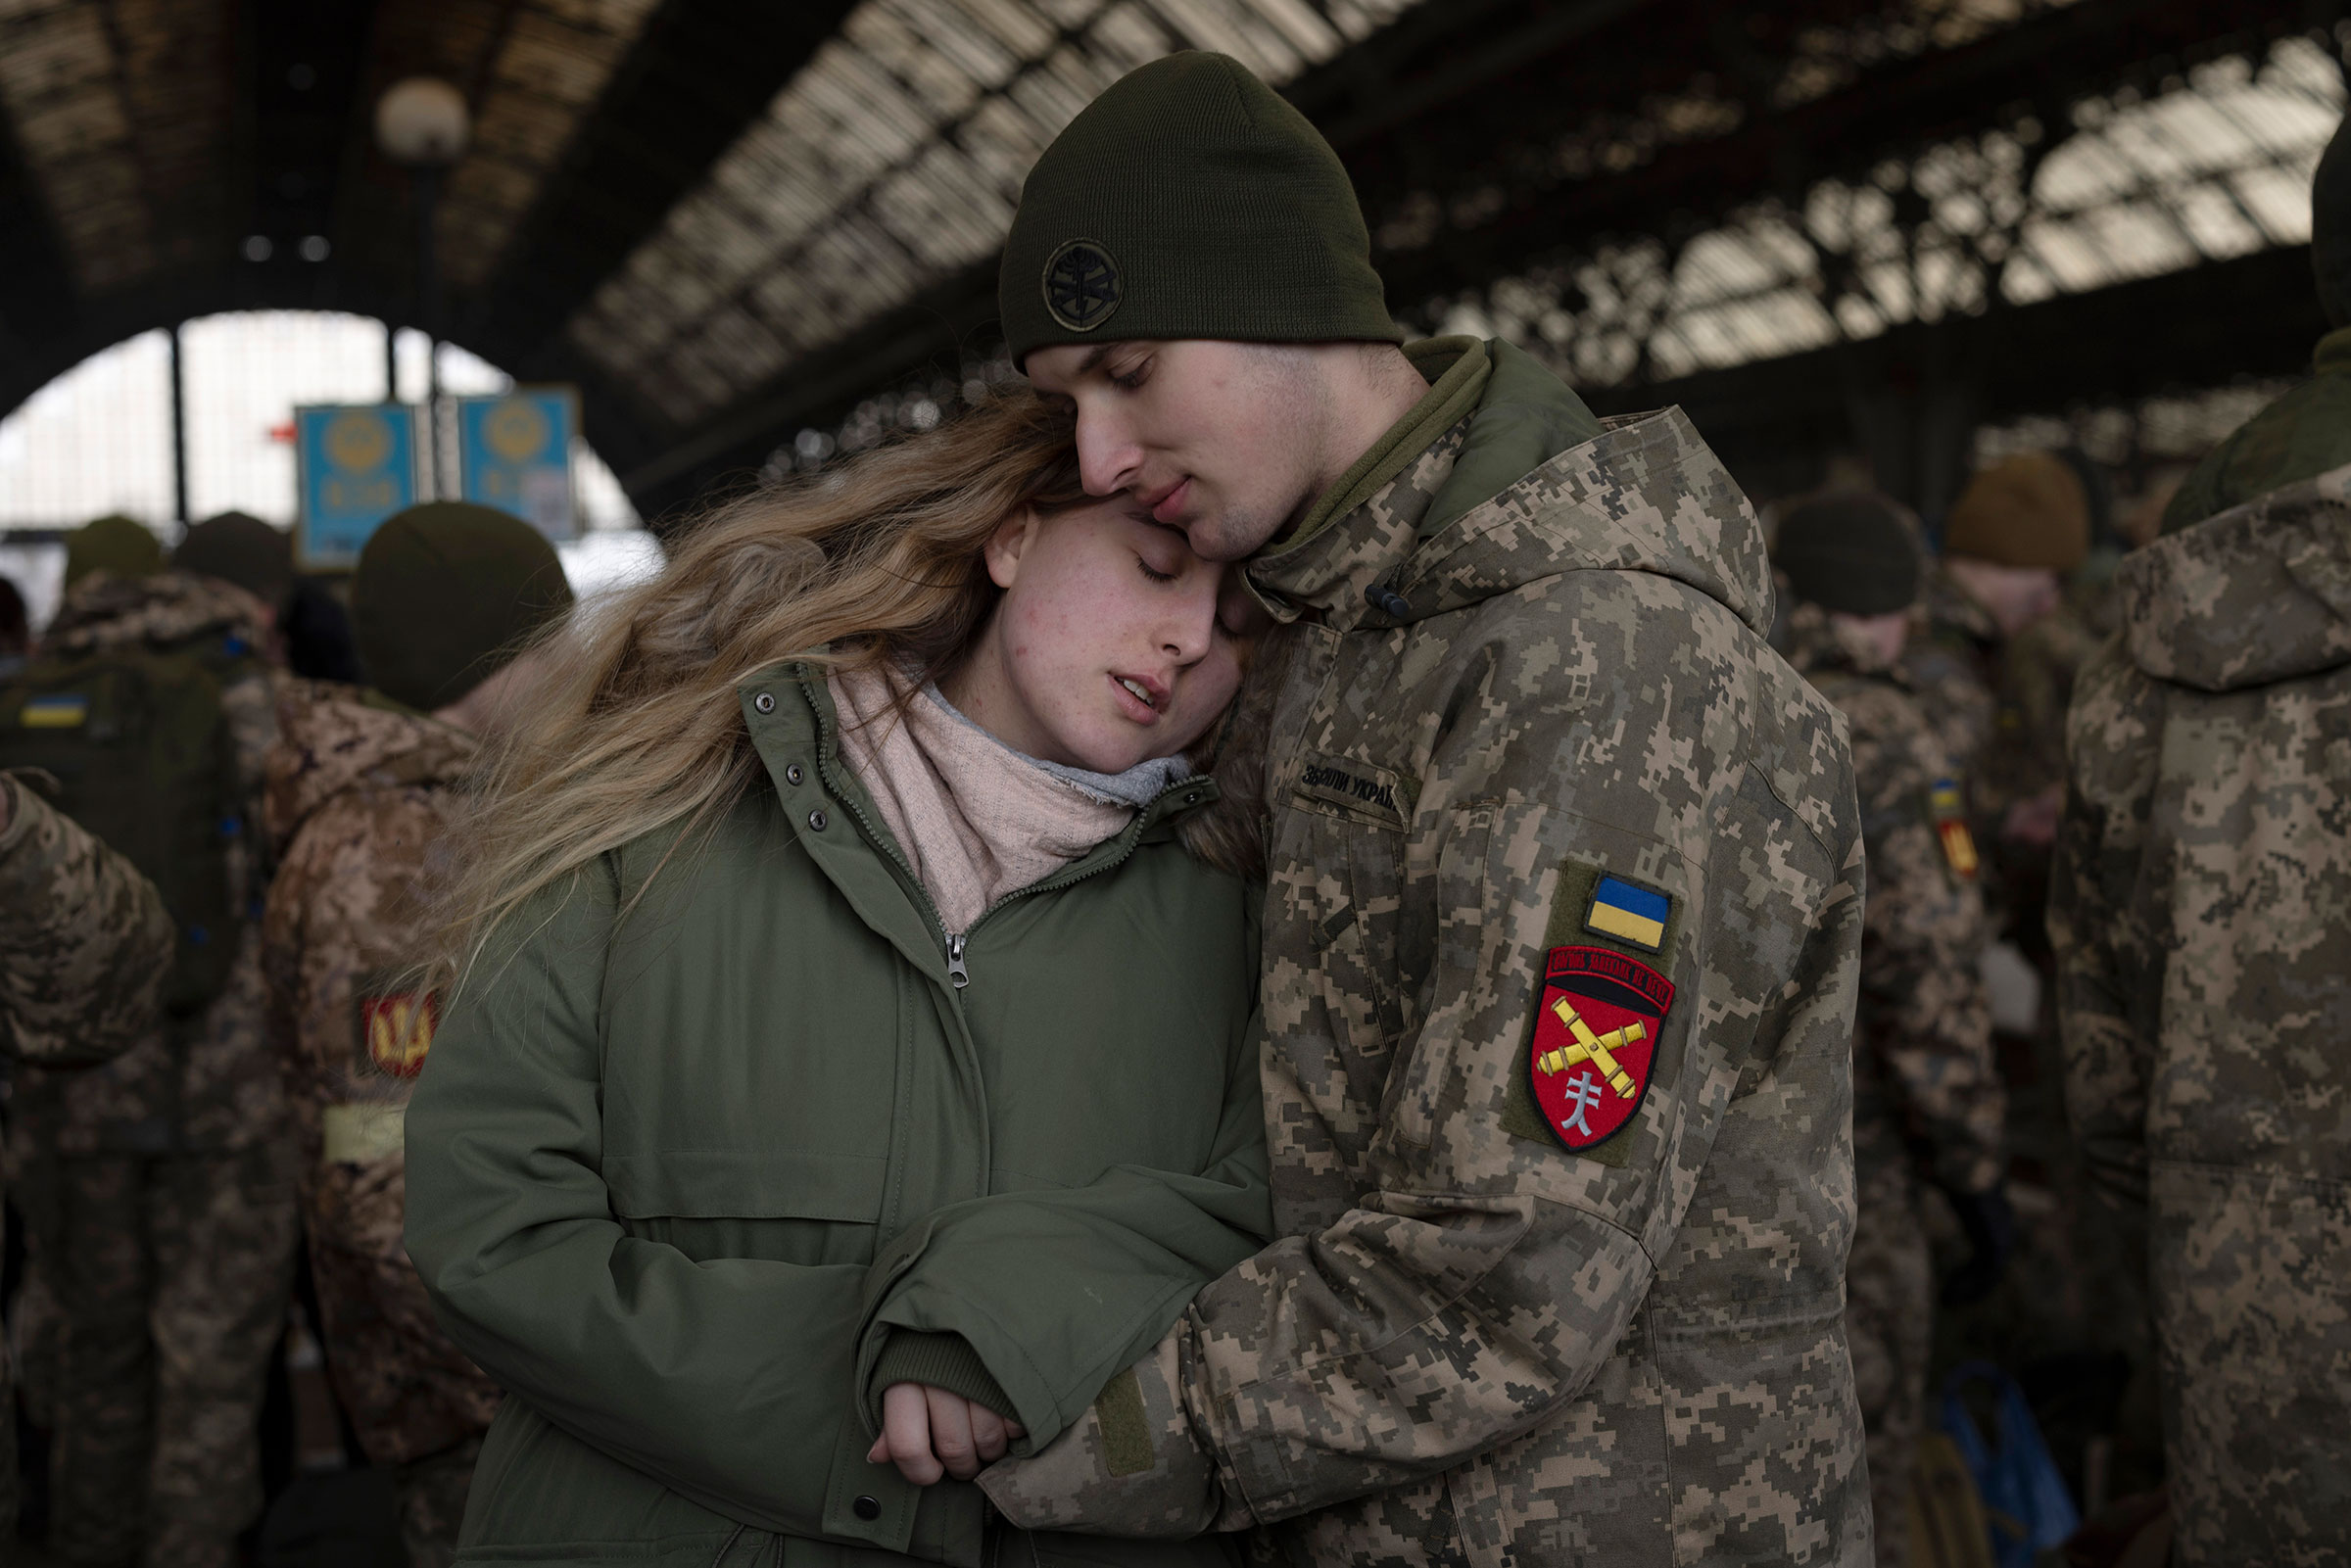 Eugene says goodbye to his partner Tanya before boarding a train to Dnipro from the main train terminal in Lviv on March 9. (Dan Kitwood—Getty Images)